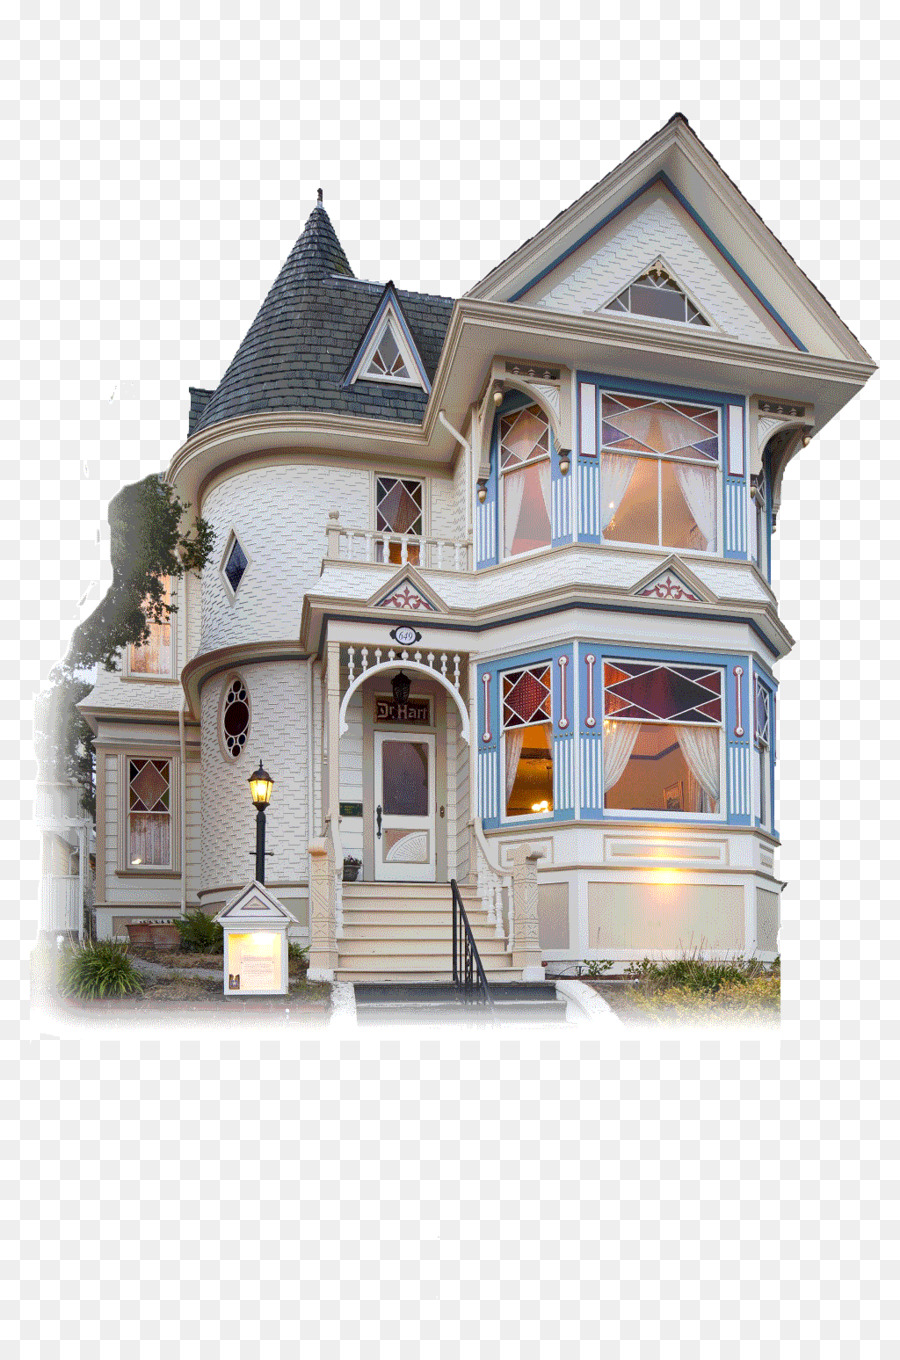 The White Hart House Monterey Building Victorian era - house png download - 1024*1536 - Free Transparent White Hart png Download.